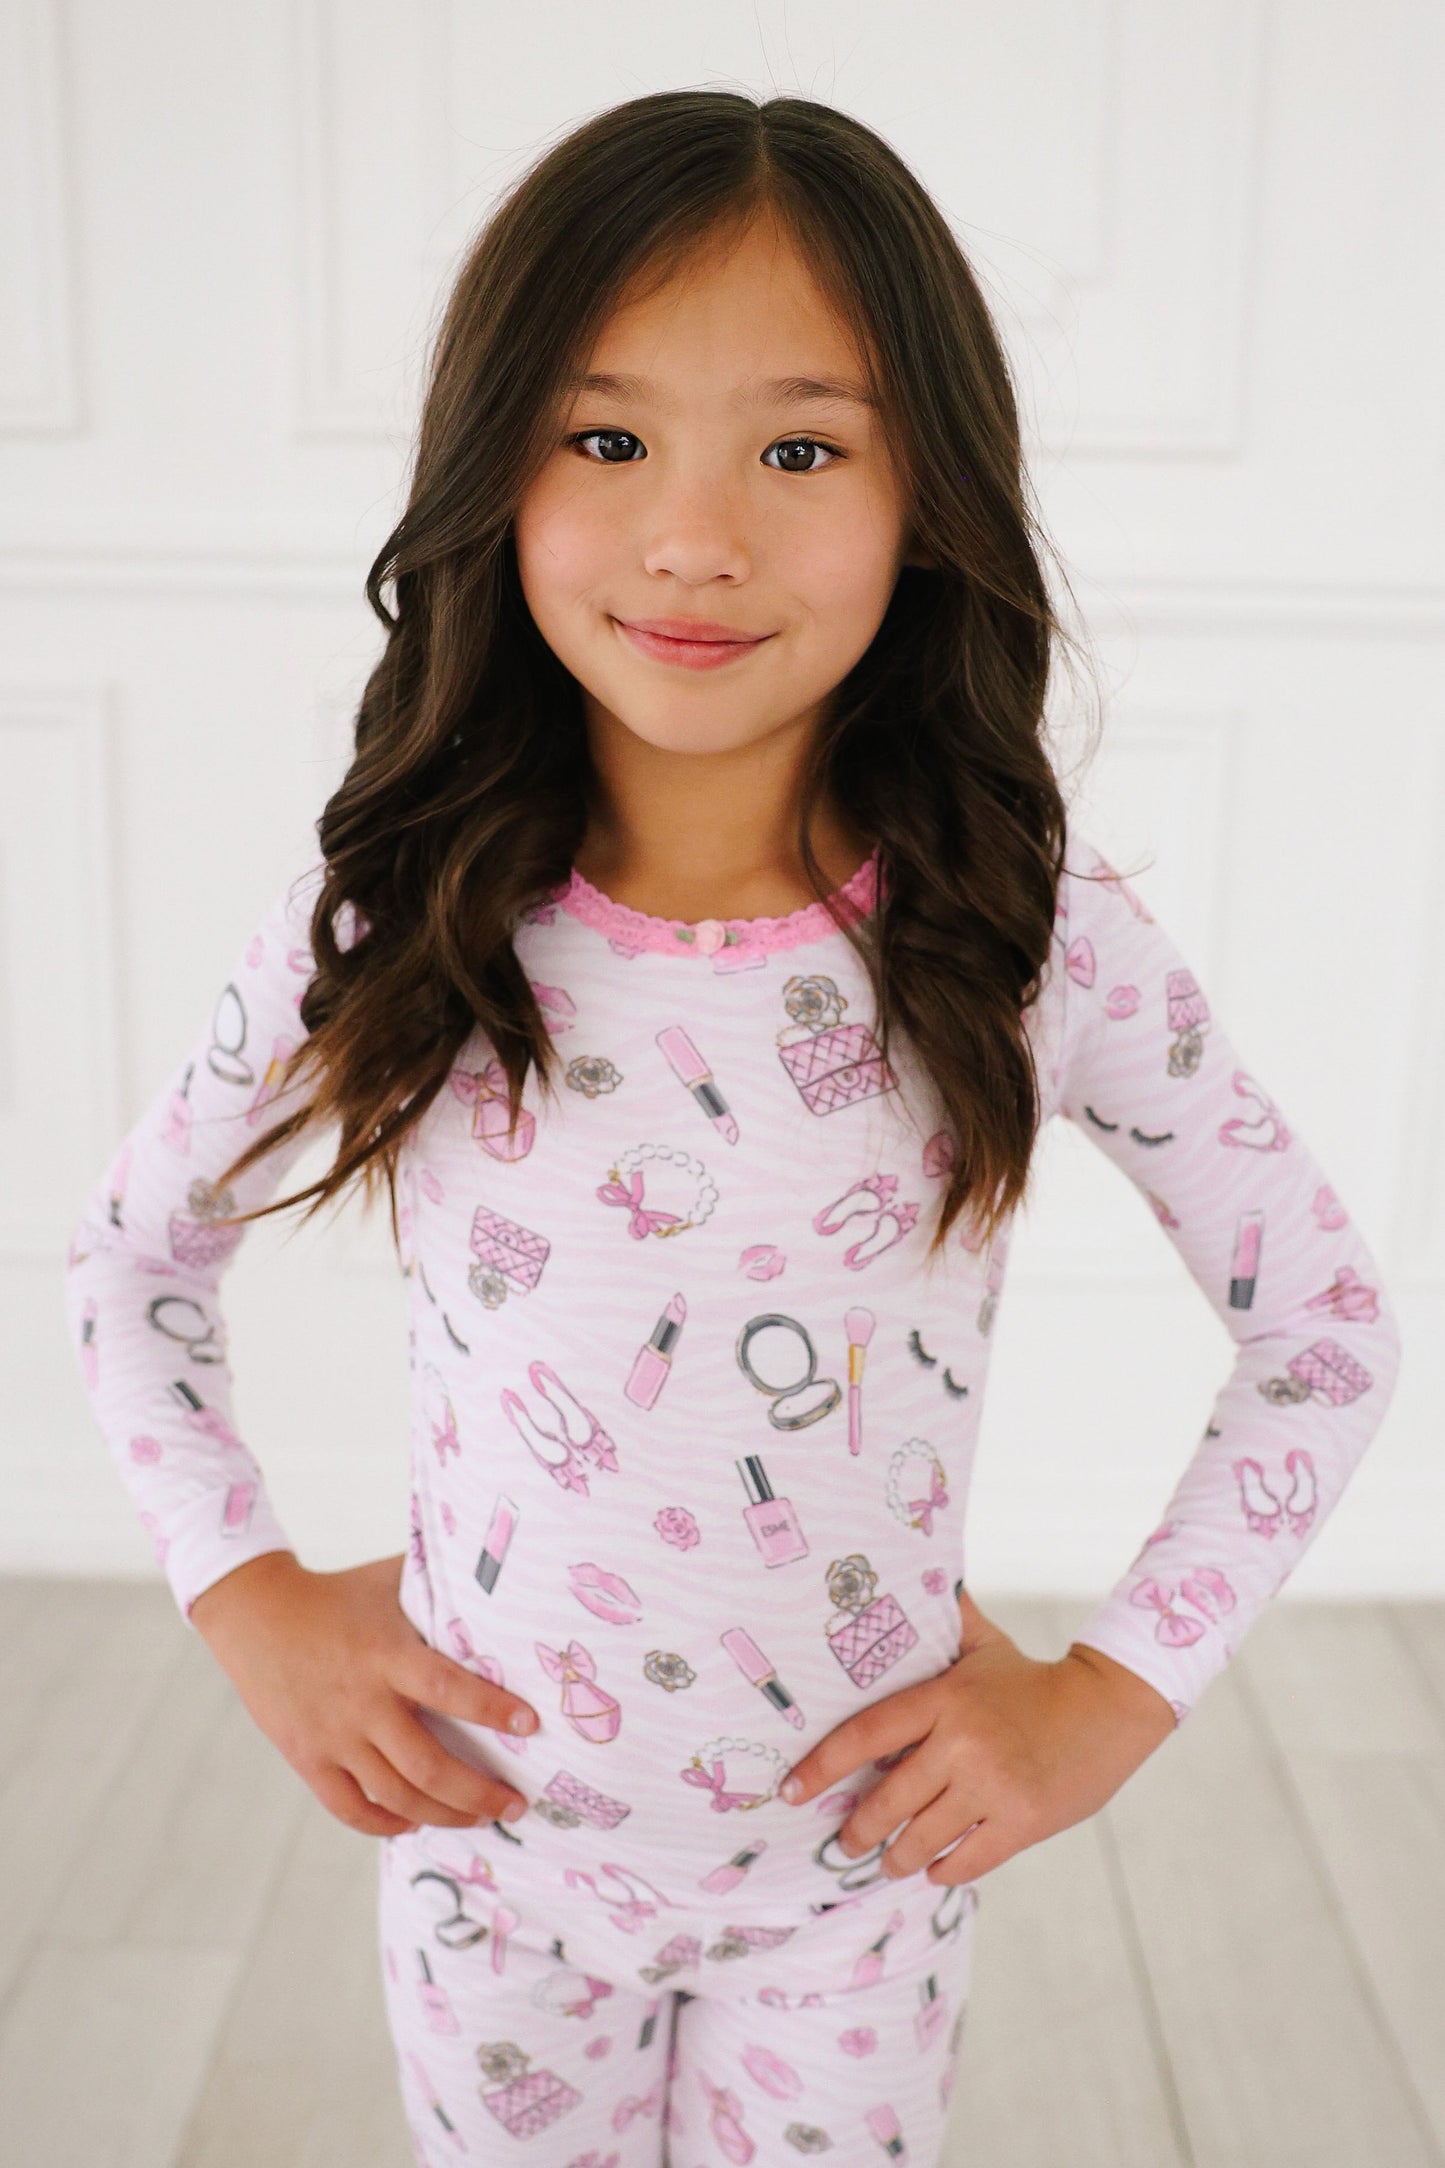 Esme girl slong sleeve pajamas in pink, design is glam with makeup items.